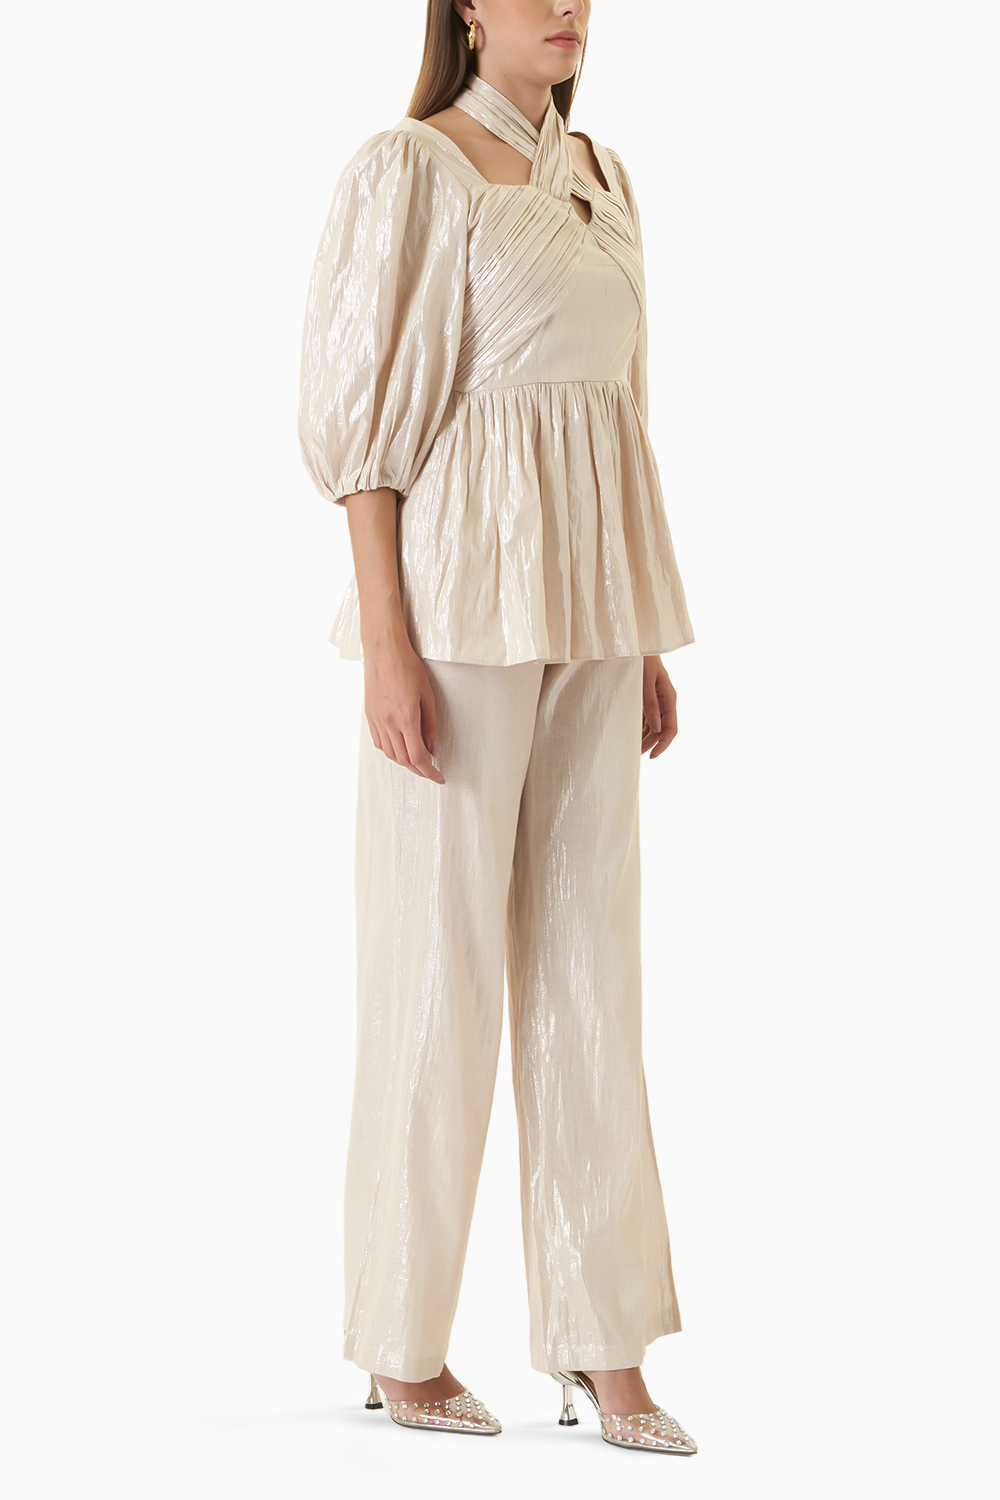 Clio Top with Celina Pants